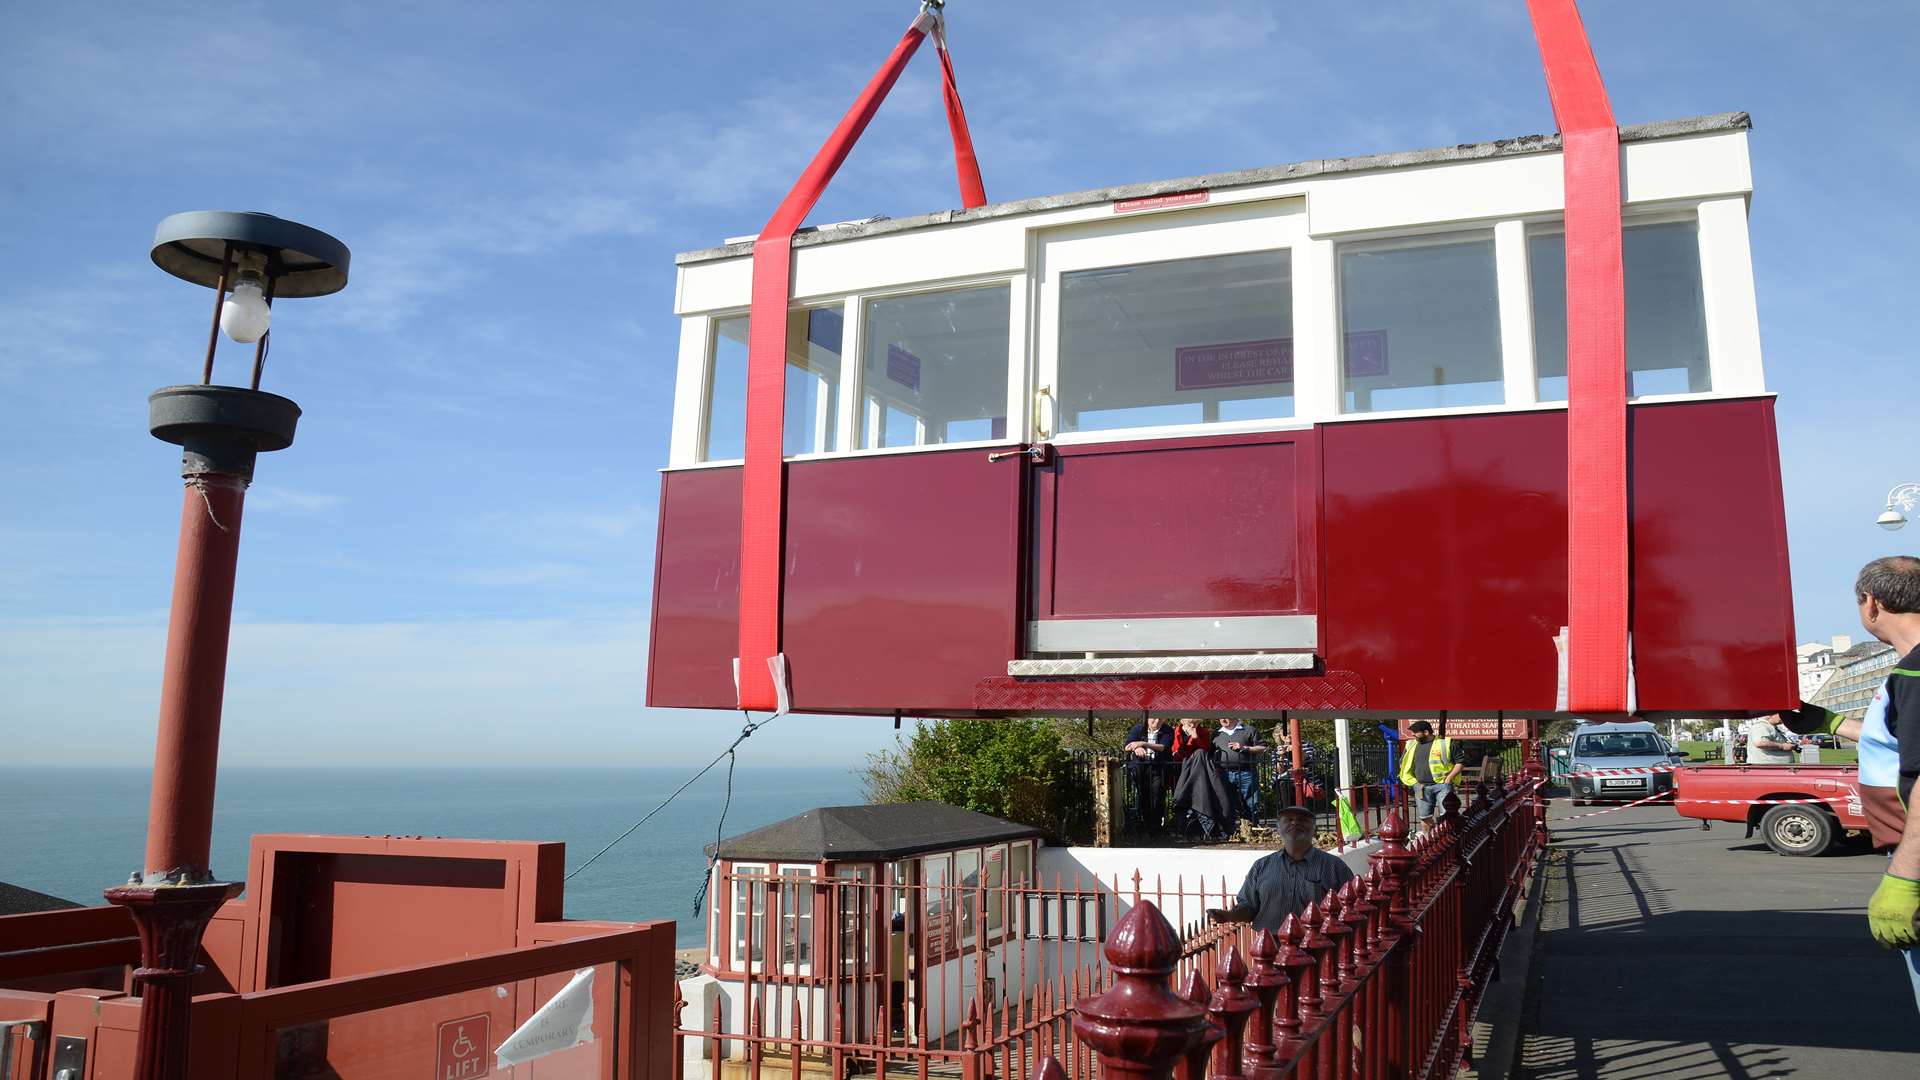 The carriage body being hoisted back in to place after refurbishment of the Leas Lift